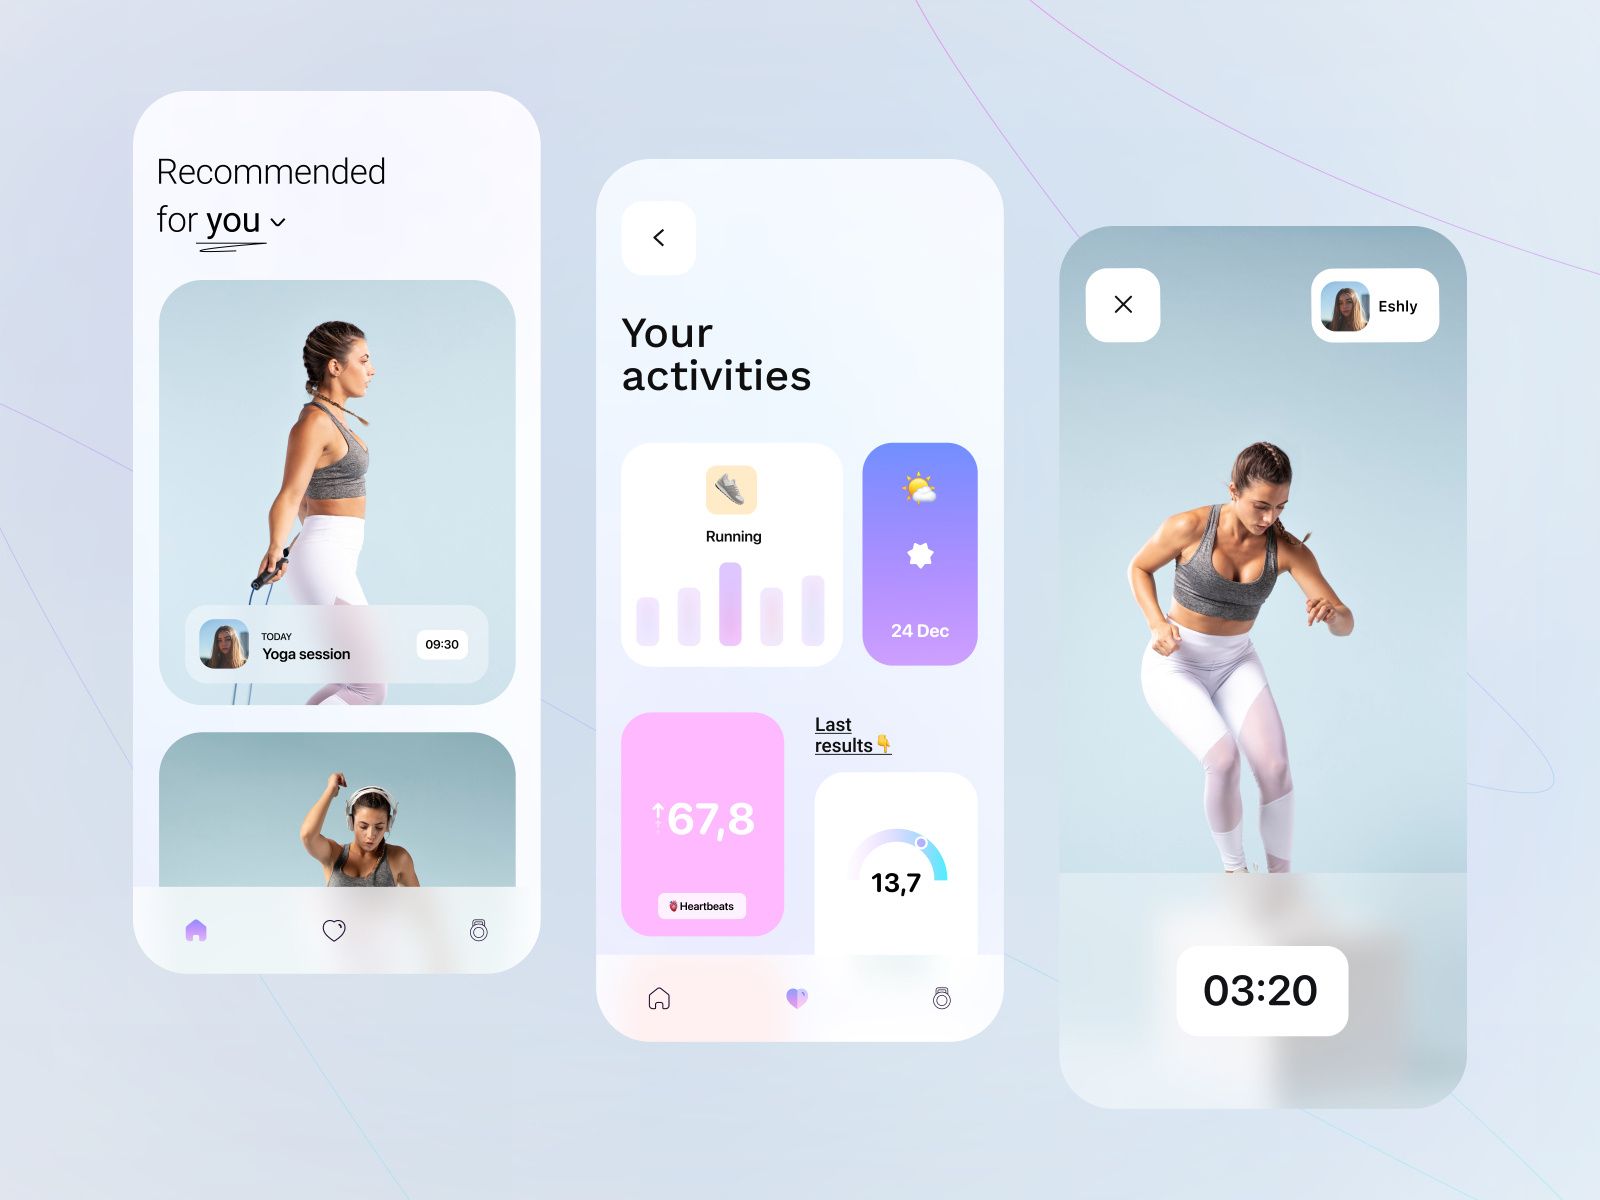 Incorporating agile development methodologies, the fitness app can meet user needs and adapt to emerging trends in health and wellness